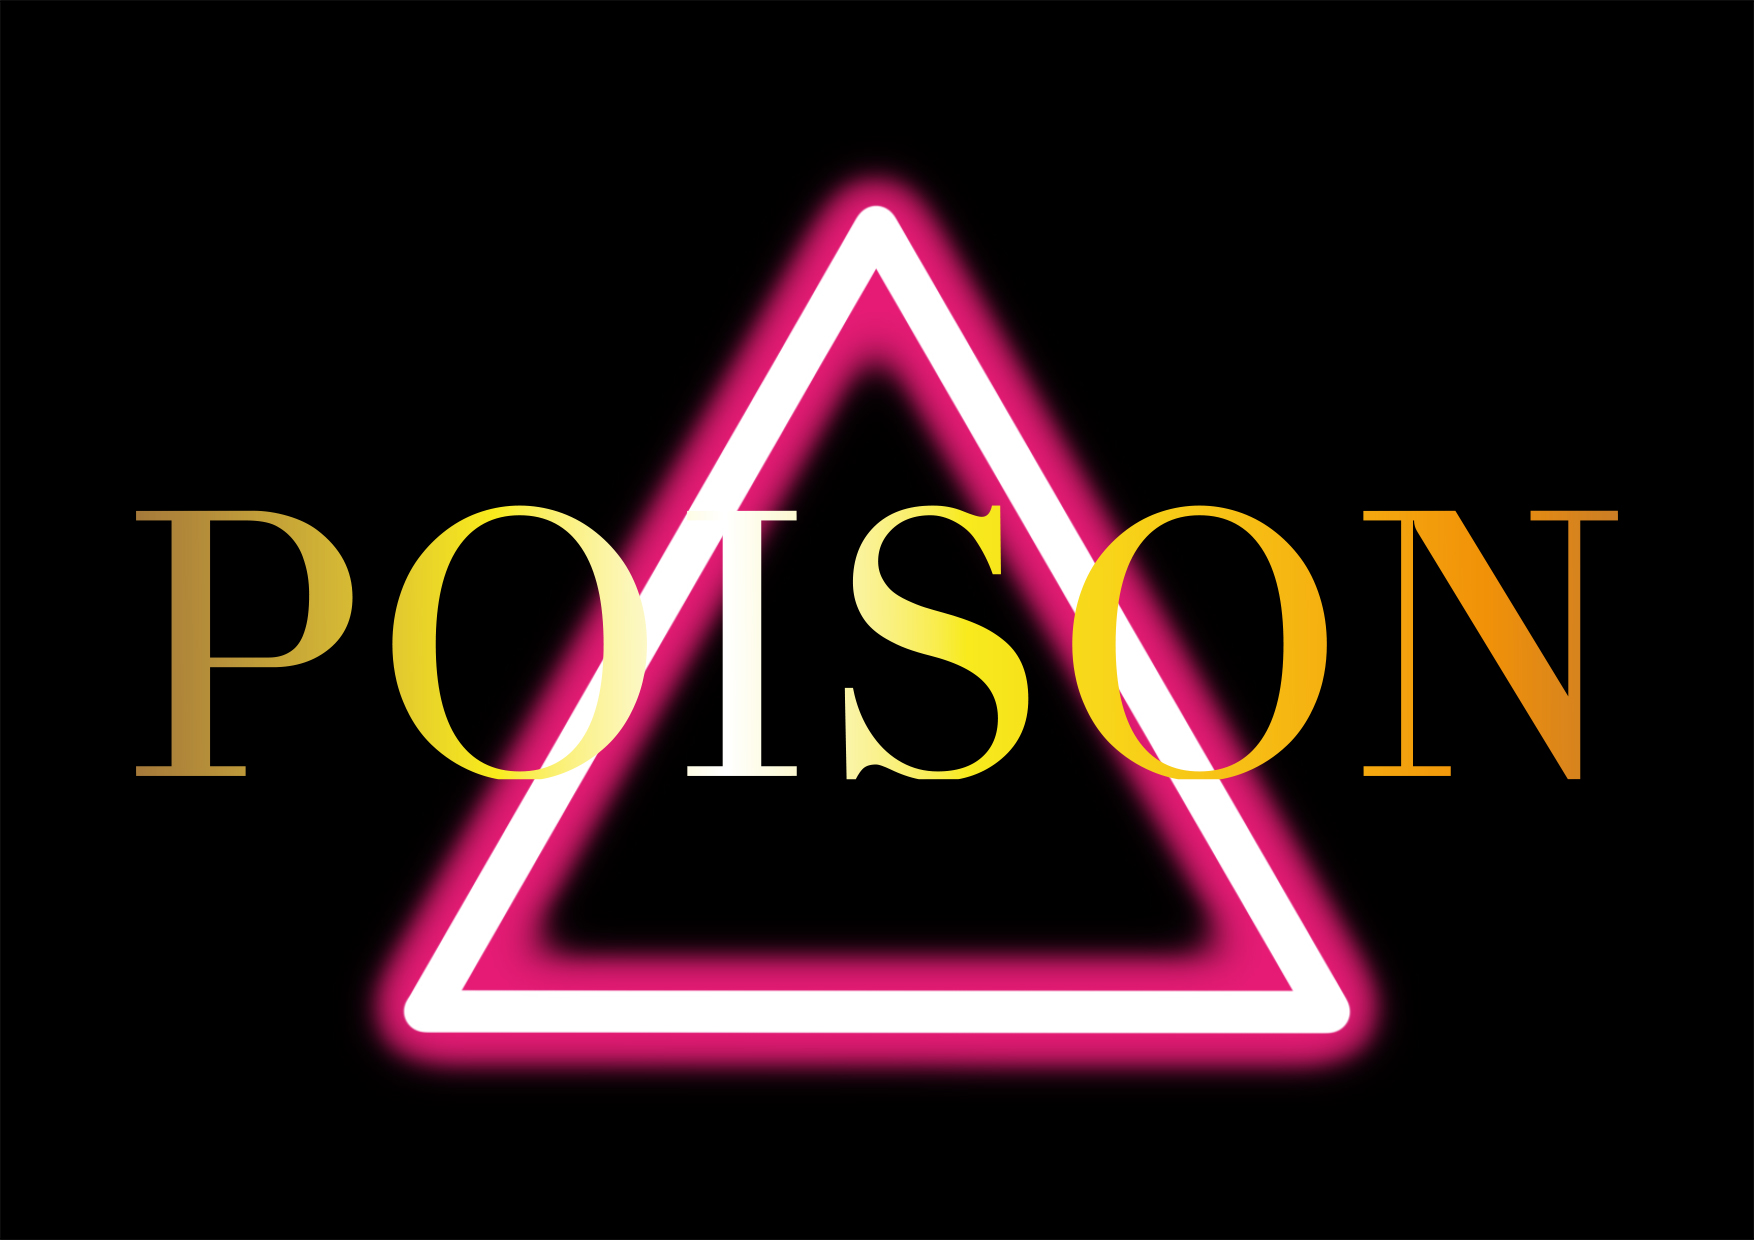 Poison by Guillermo Pascual Vich - Creative Work